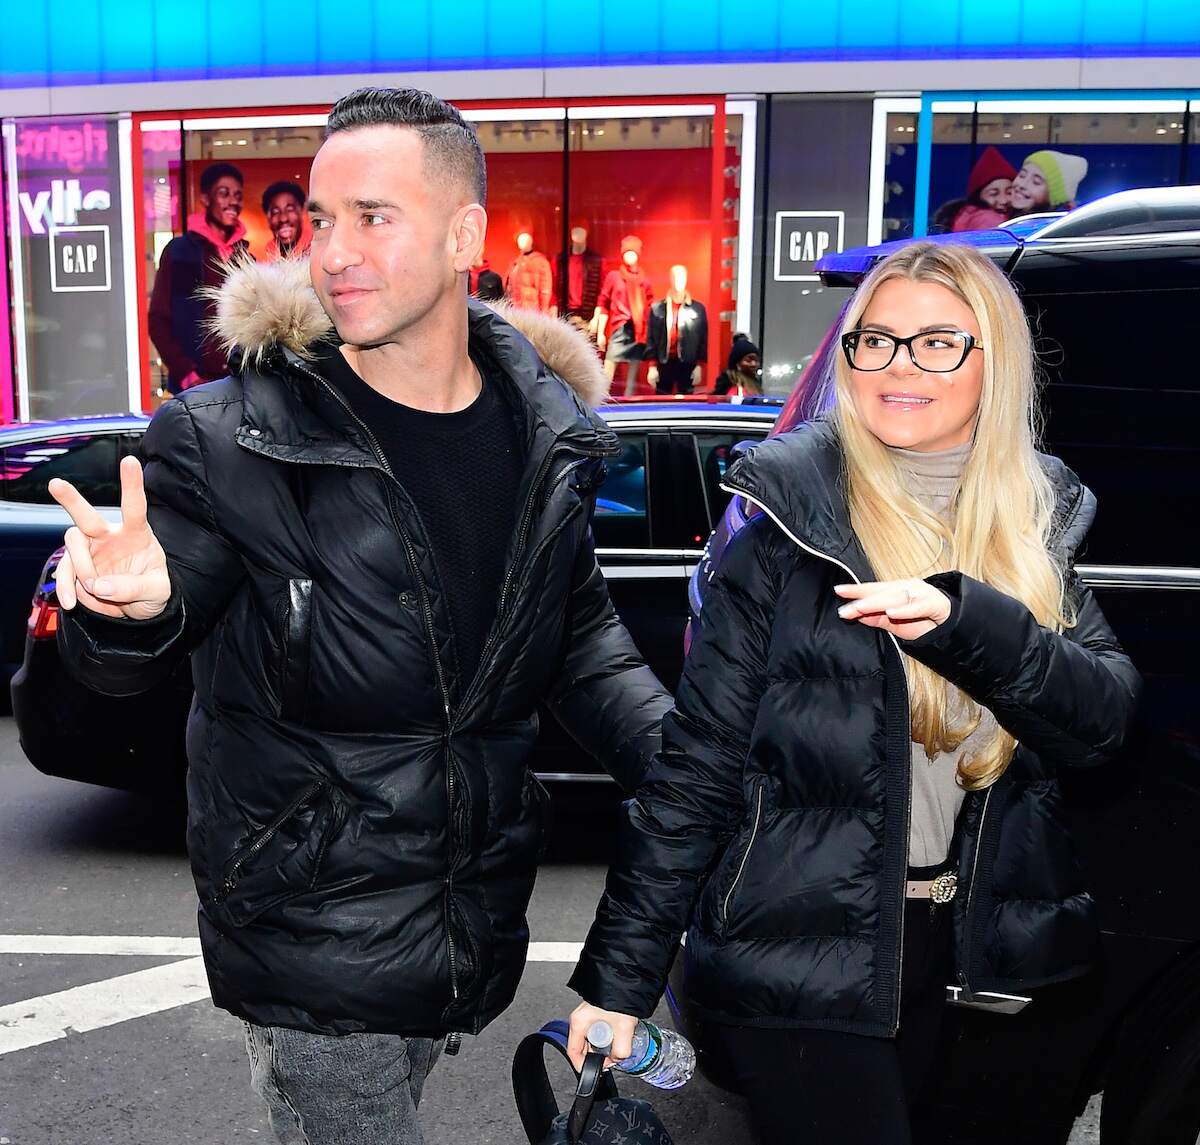 Mike 'The Situation' Sorrentino and Lauren Sorrentino waves at paparazzi in New York City